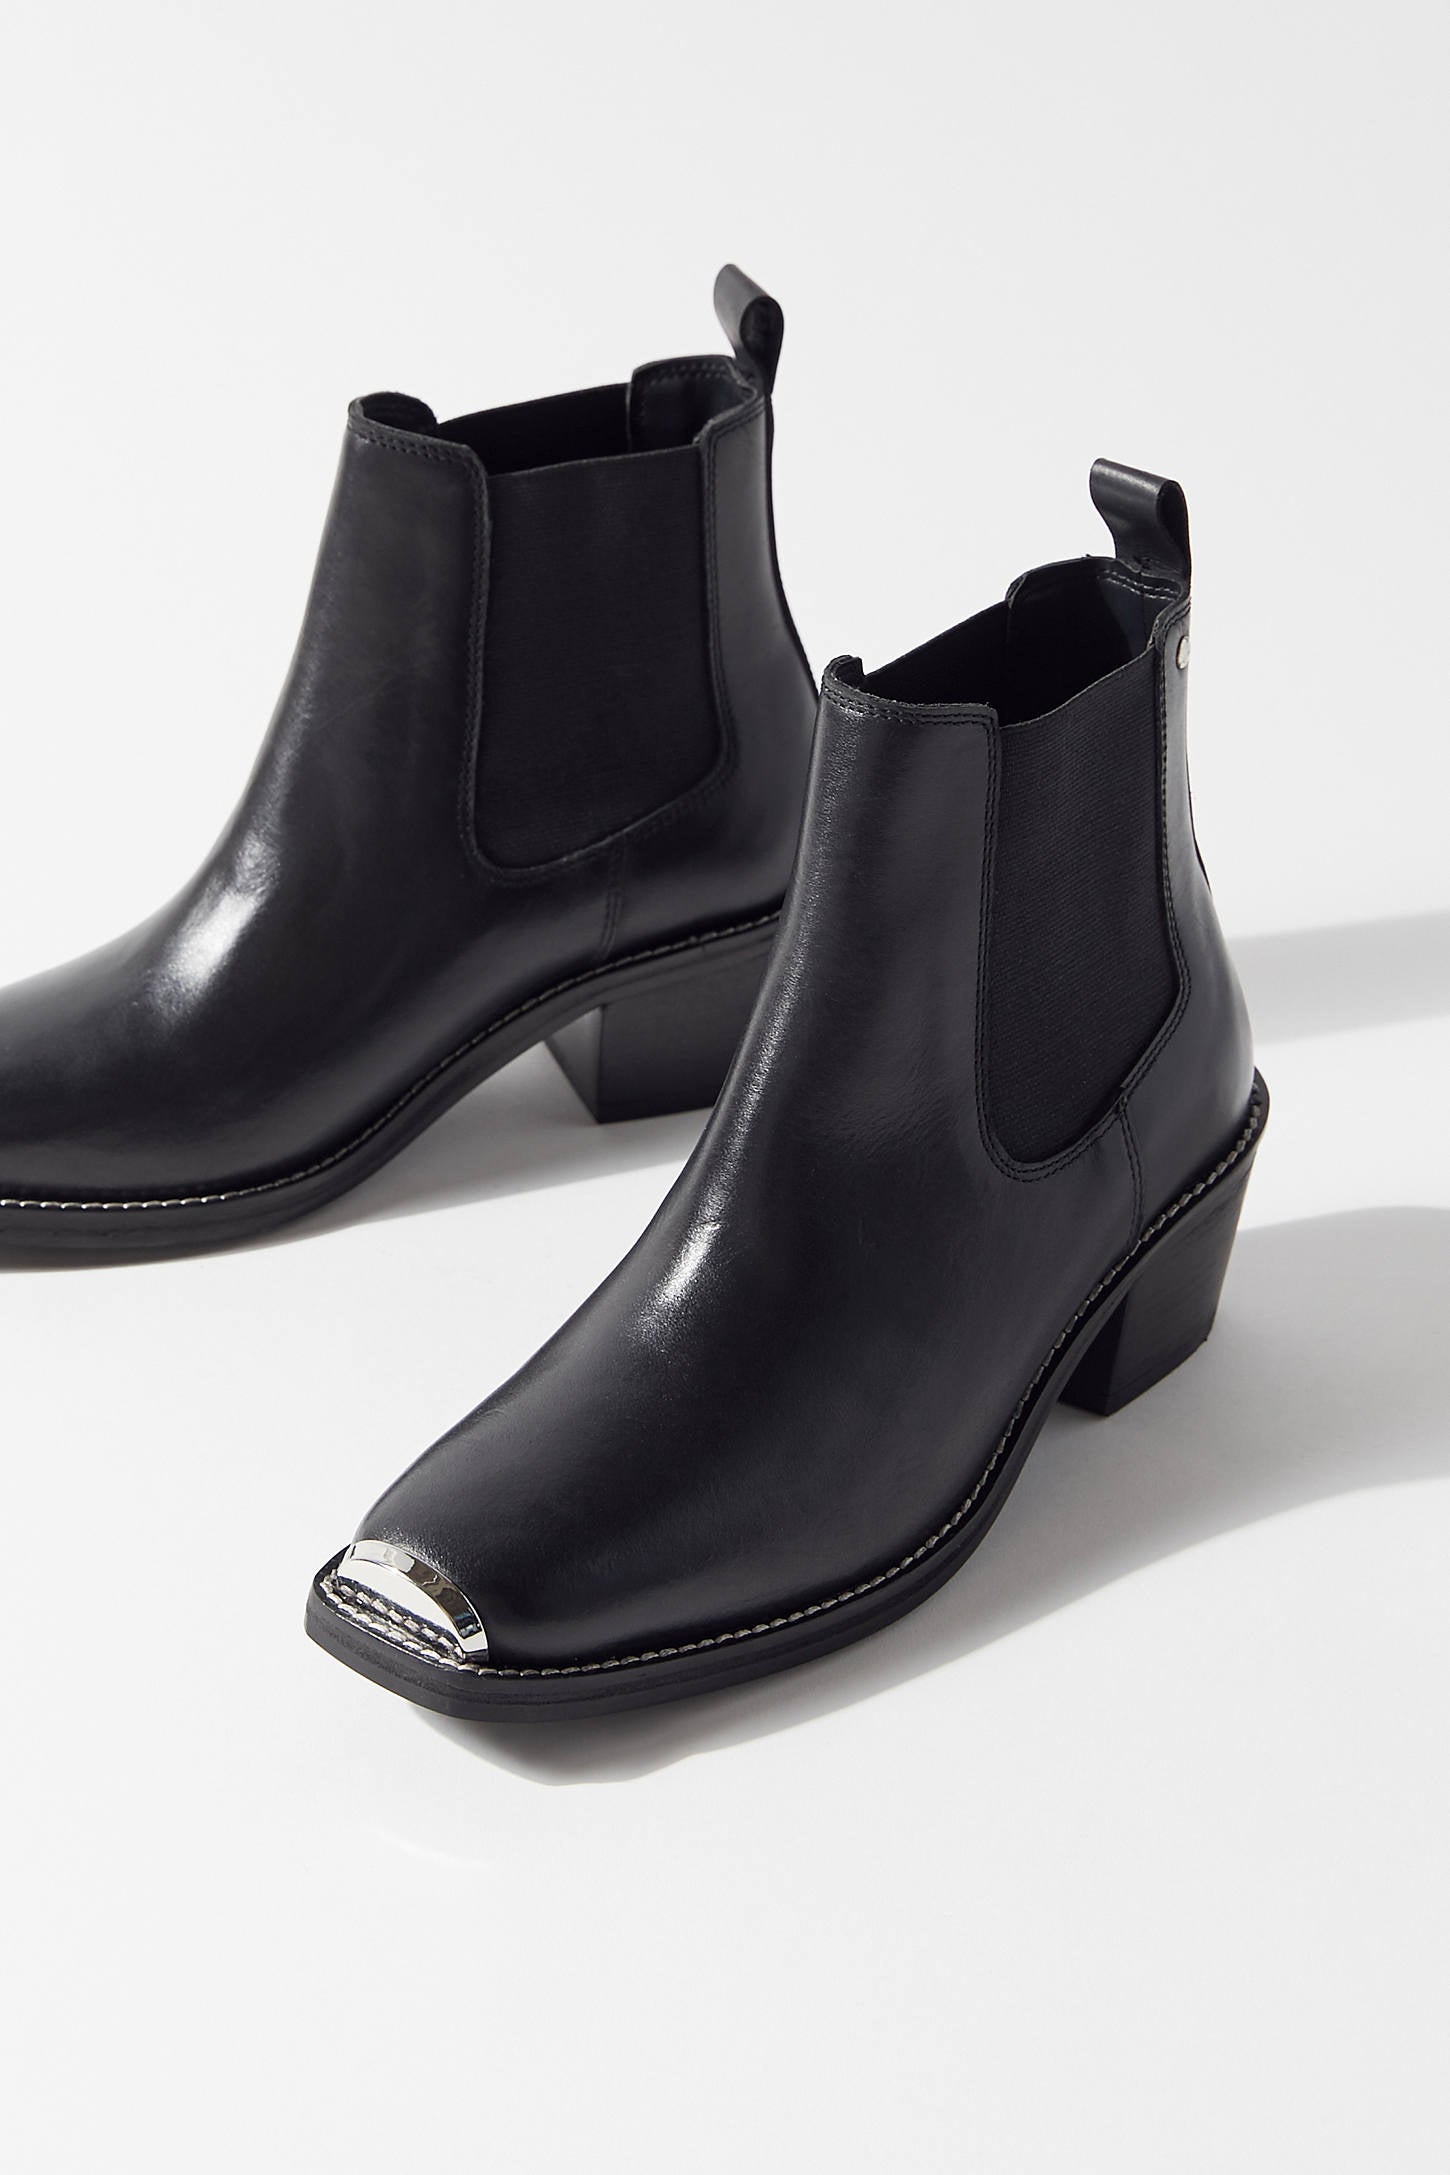 Urban Outfitters + Anna Cap Toe Chelsea Boot